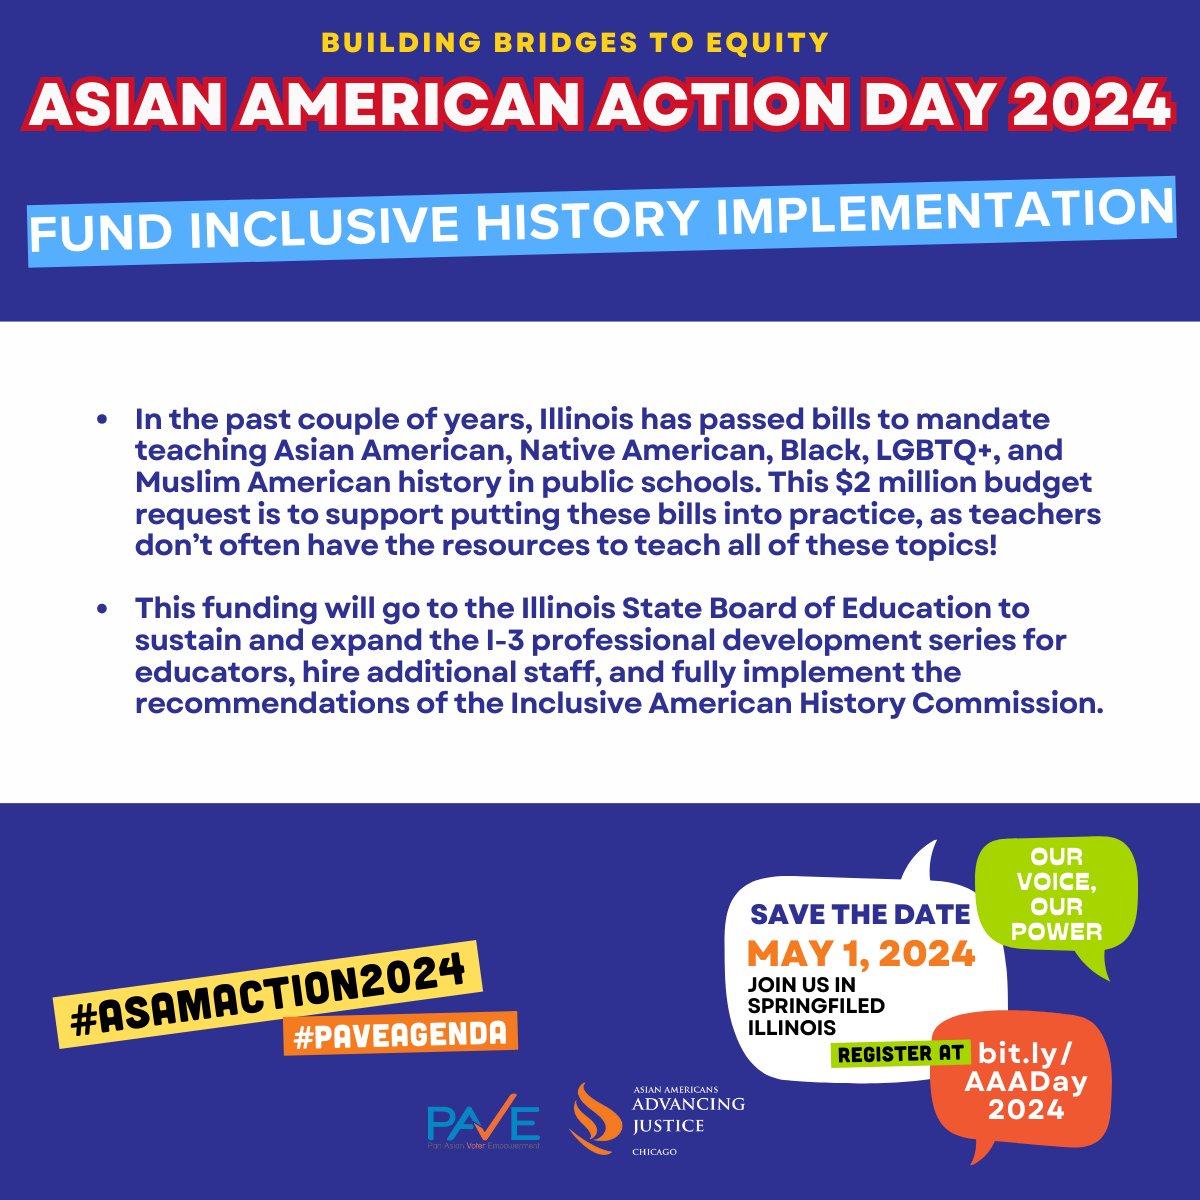 On 5/1, we're bringing OUR VOICE to show OUR POWER this Asian American Action (AAA) Day in Springfield. AAA Day is a way for us to share our personal stories with elected officials and push for our demands! Sign up today at bit.ly/AAADay2024 ✨ #AsAmAction2024 #PAVEAgenda